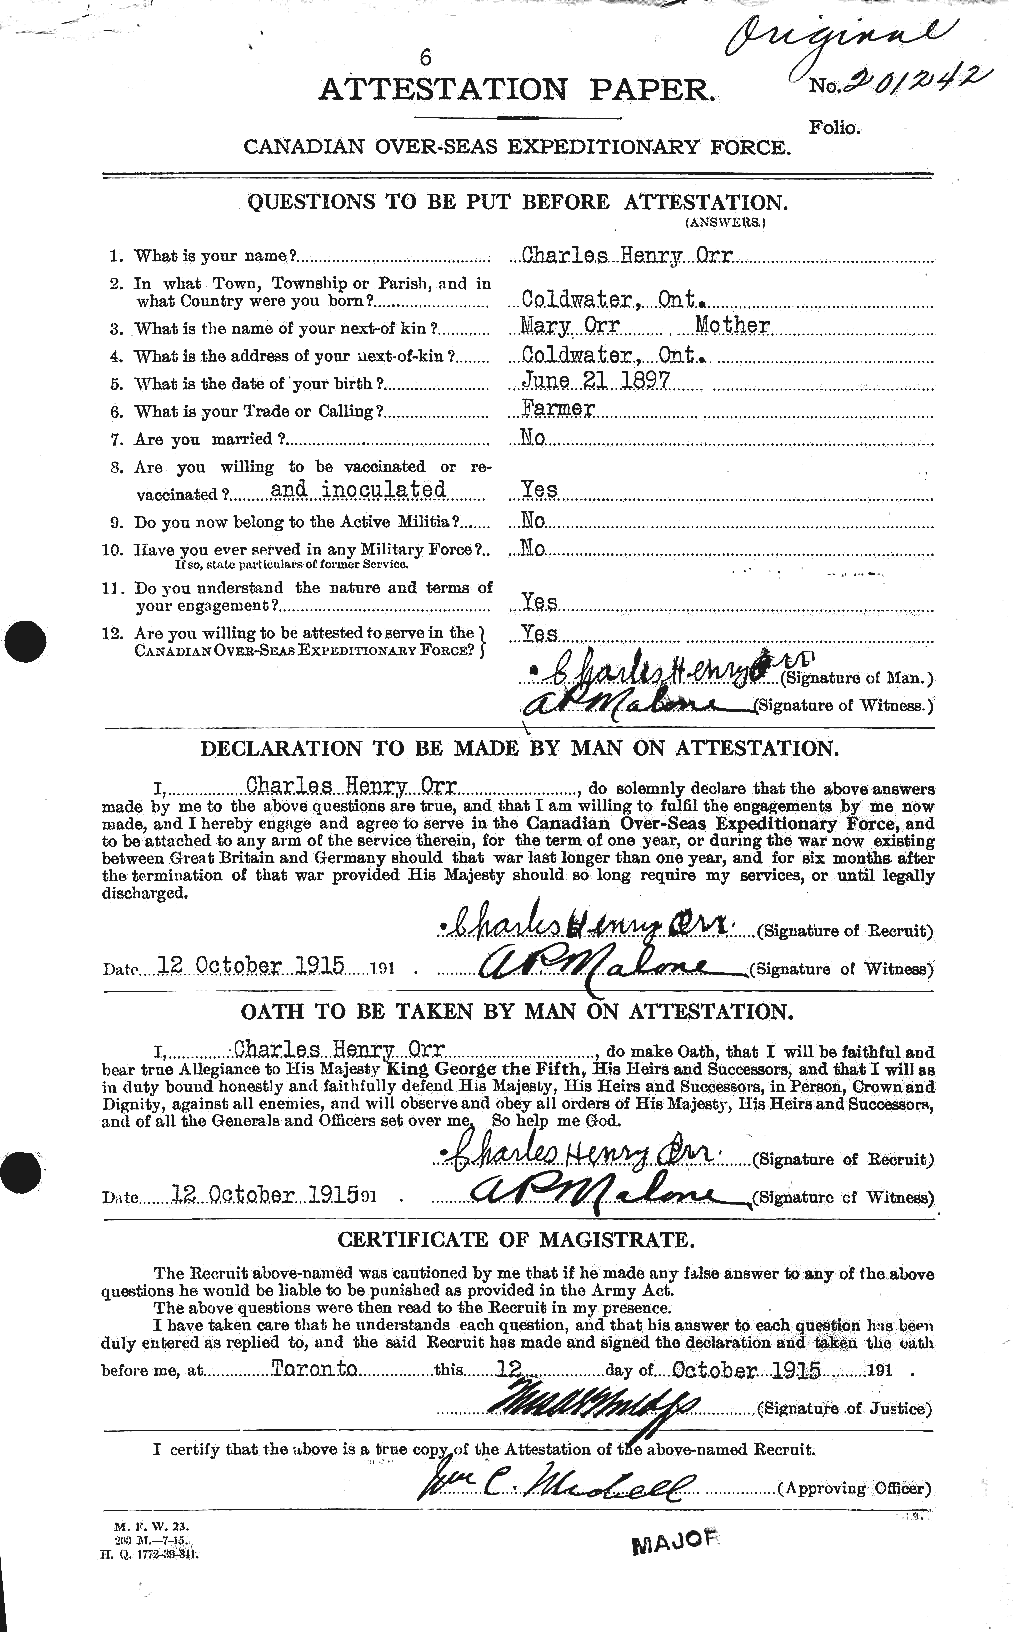 Personnel Records of the First World War - CEF 558590a